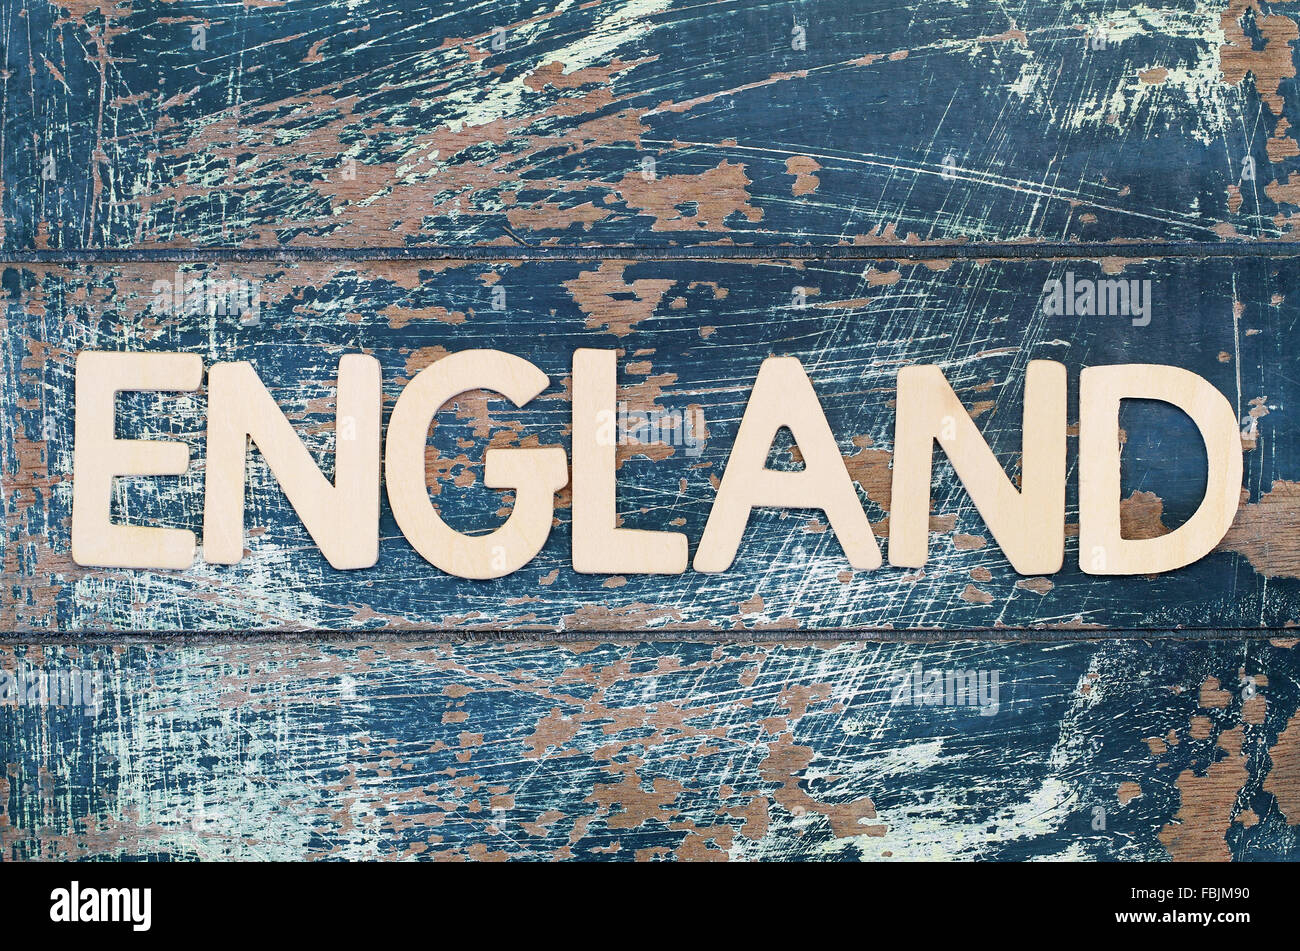 England written with wooden letters on rustic surface Stock Photo